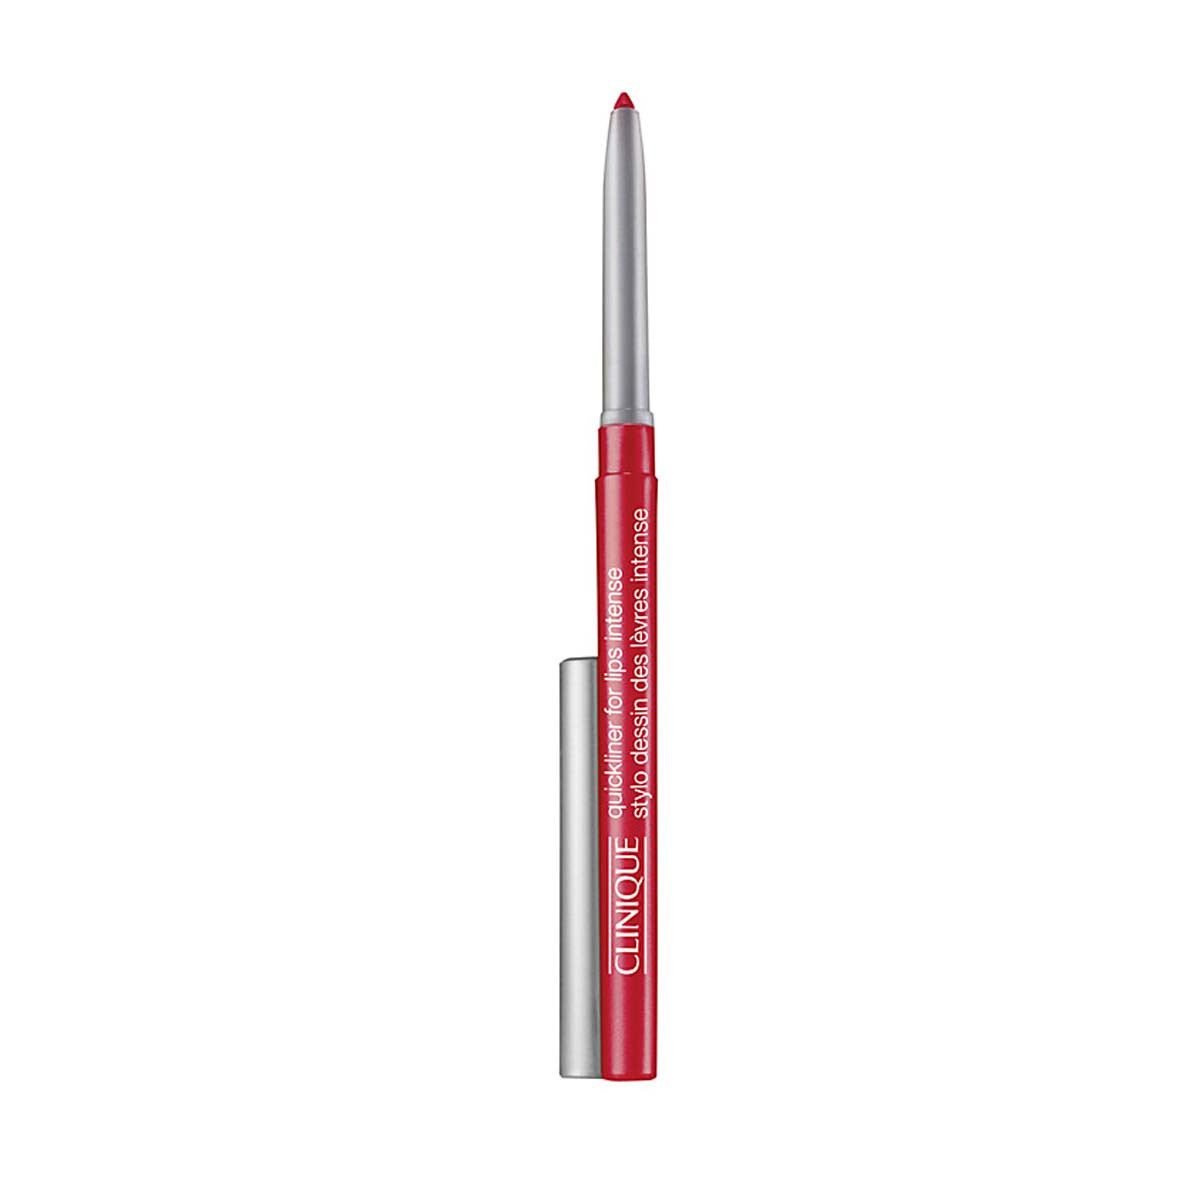 Clinique quicklinerTM for lips intense - 05 intense passion  0,26 g, 05 INTENSE PASSION, large image number 0